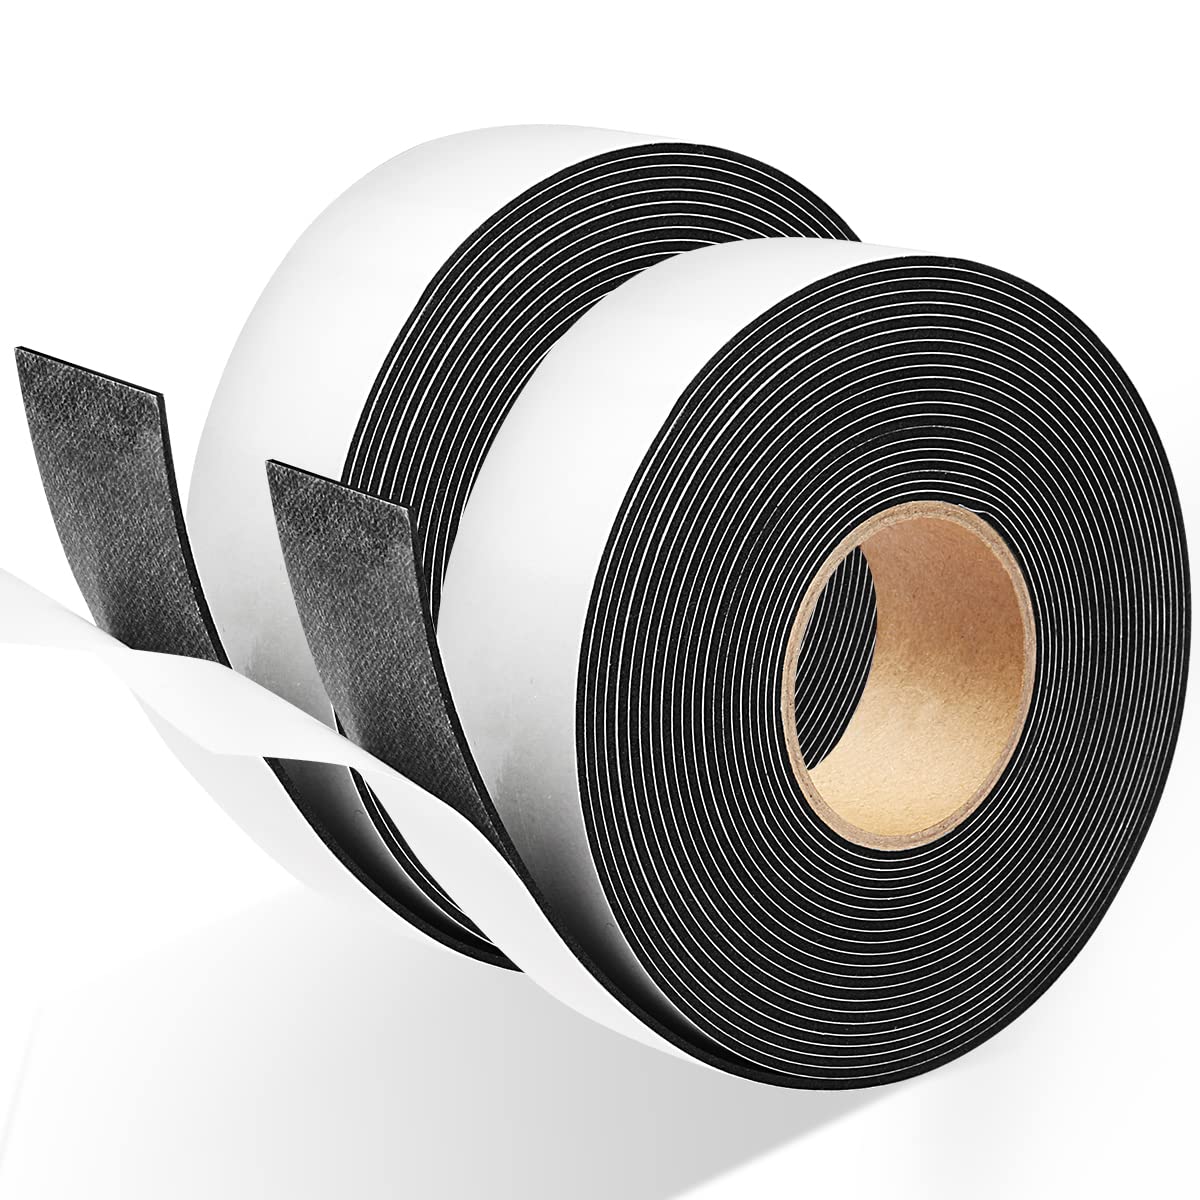 Yotache Foam Strips with Adhesive 2 Rolls Total 26 Feet Long 1/2 Inch Wide  X 1/4 Inch Thick, Neoprene Weather Stripping High Density Foam Tape for  Doors and Windows Insulation, 2 X 13 Ft Each 